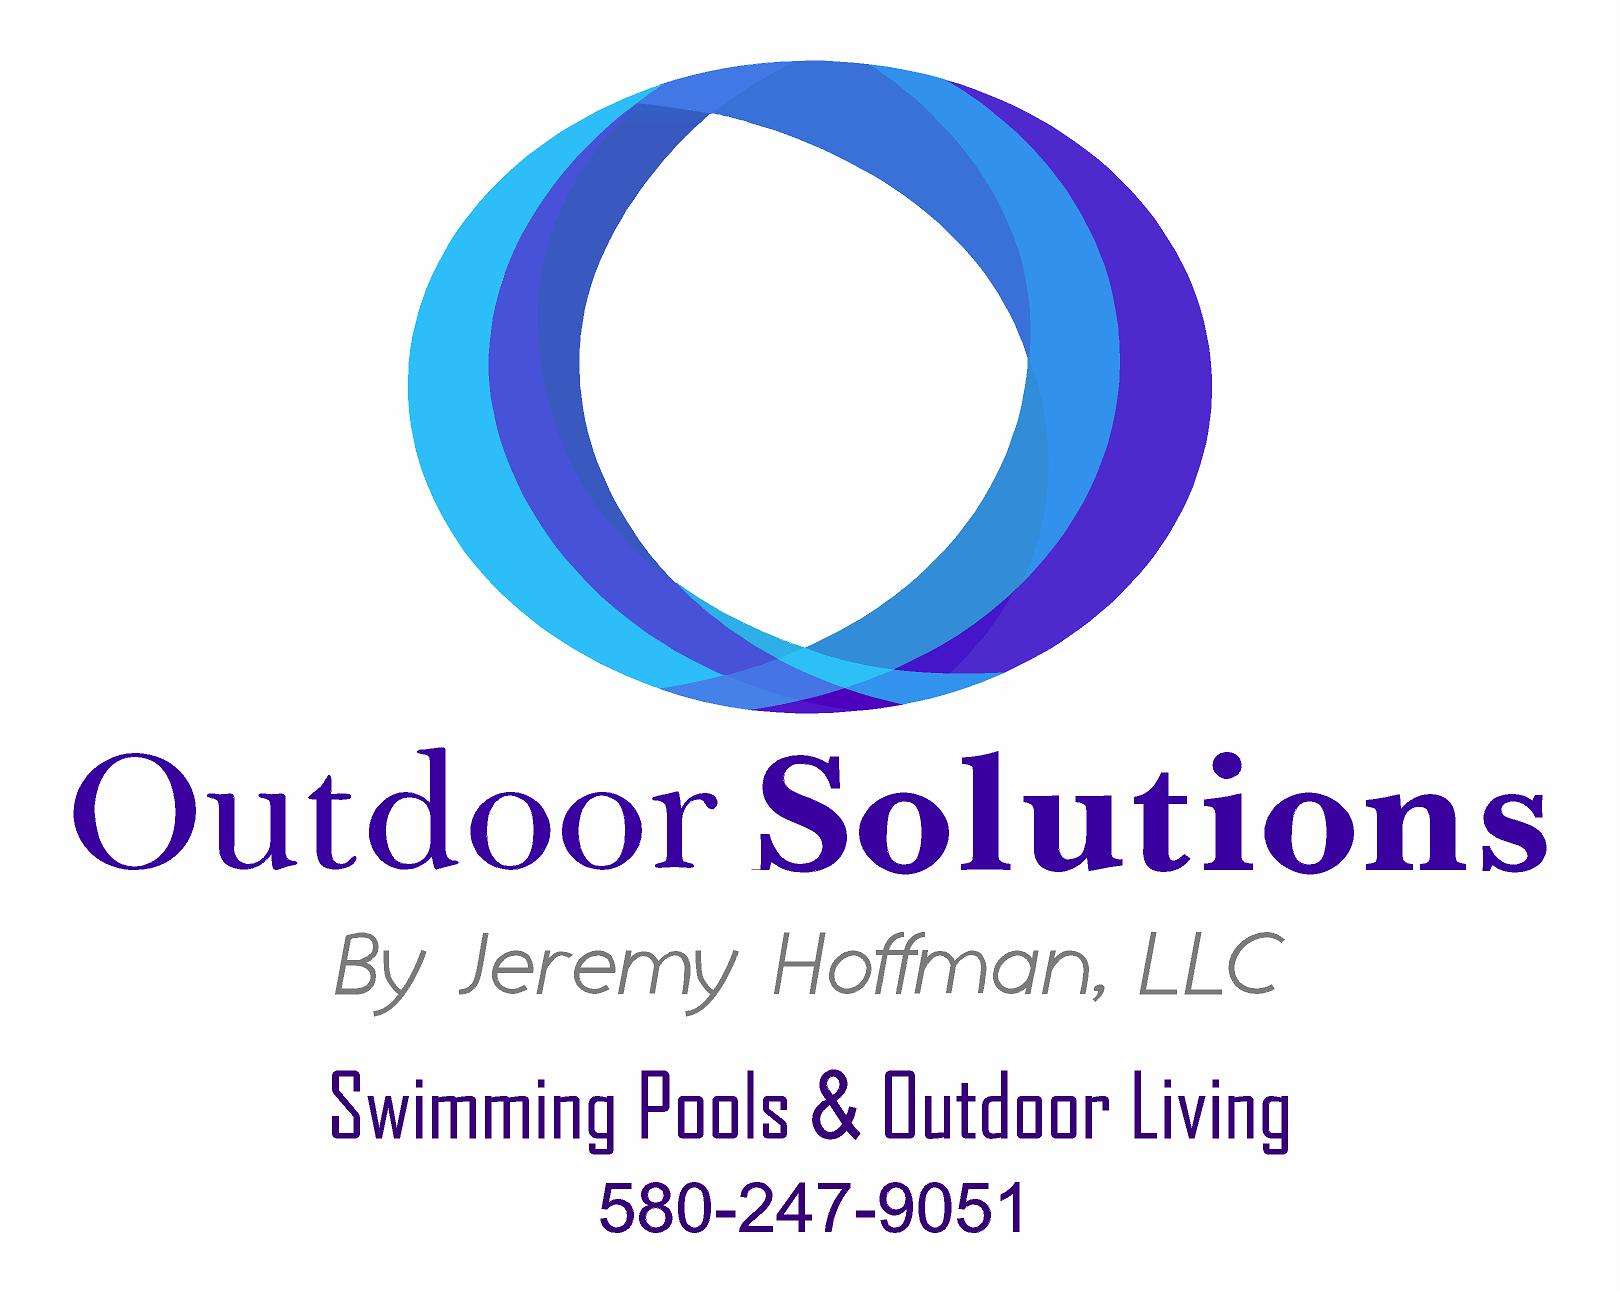 Outdoor Solutions by Jeremy Hoffman, LLC Logo